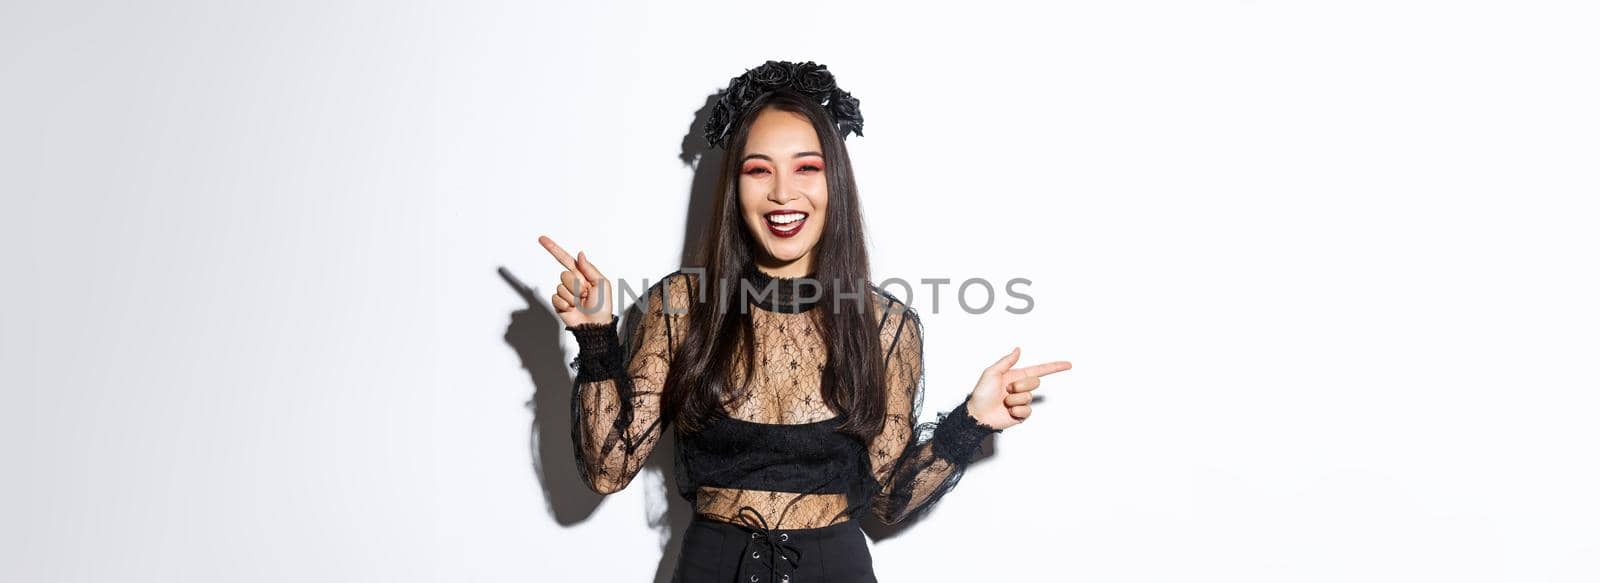 Beautiful happy young woman celebrating halloween in black lace dress, gothic style makeup, pointing fingers sideways, showing two banners or products, standing over white background.